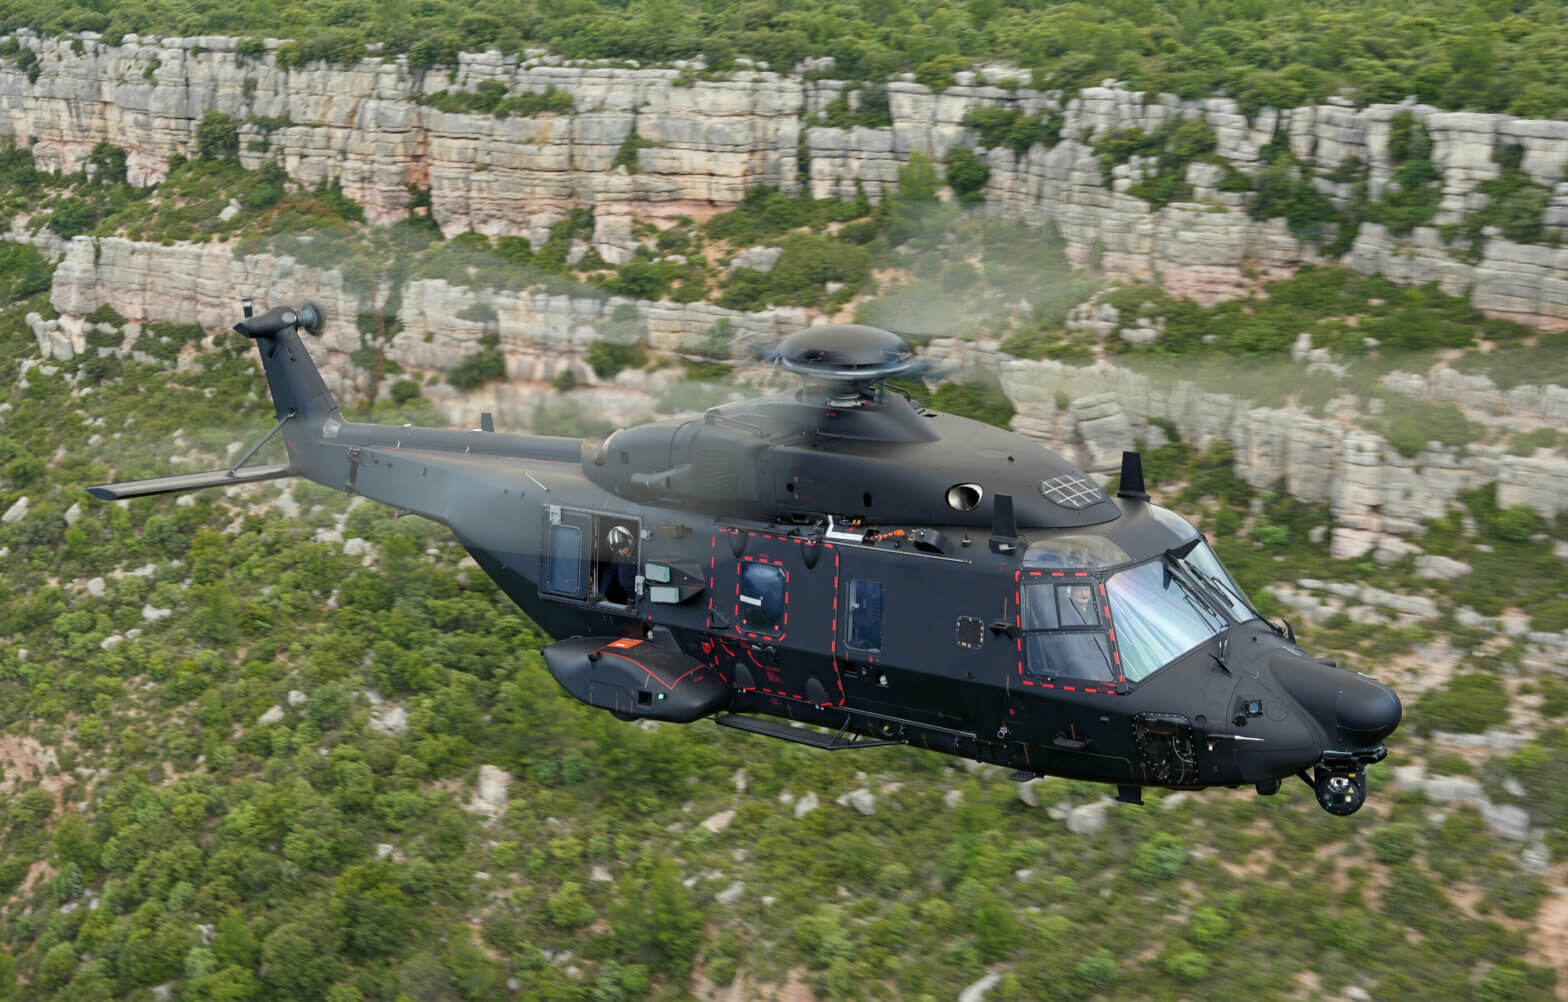 French Army NH90 for Special Forces starts flight testing